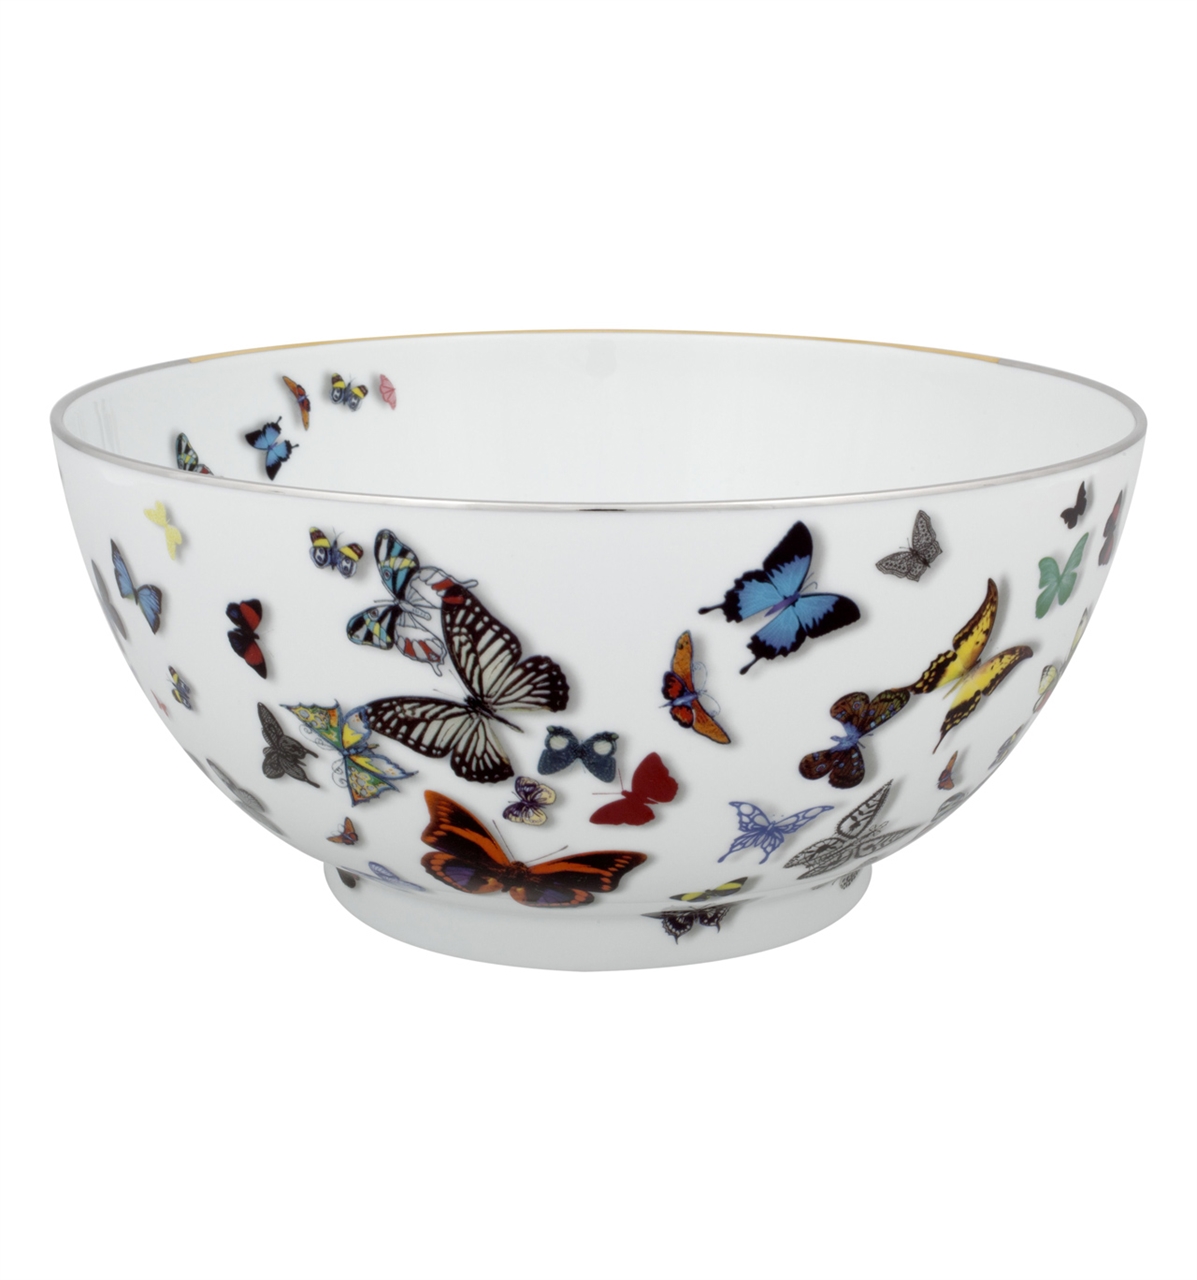 Christian Lacroix - Butterfly Parade Salad Bowl by Vista Alegre